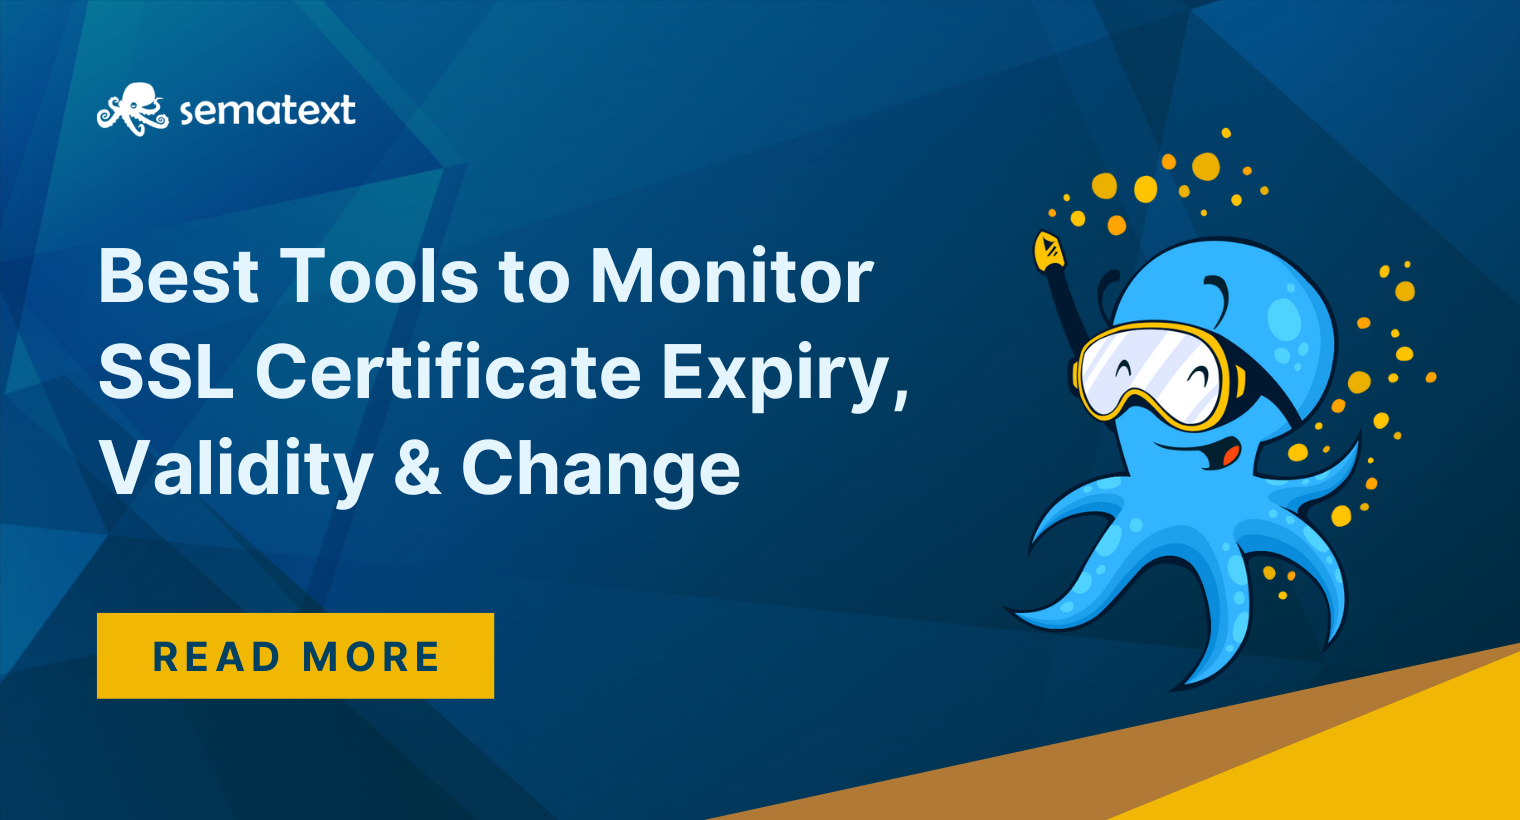 10 Best Tools to Monitor SSL Certificate Expiry, Validity & Change [2022 Comparison]